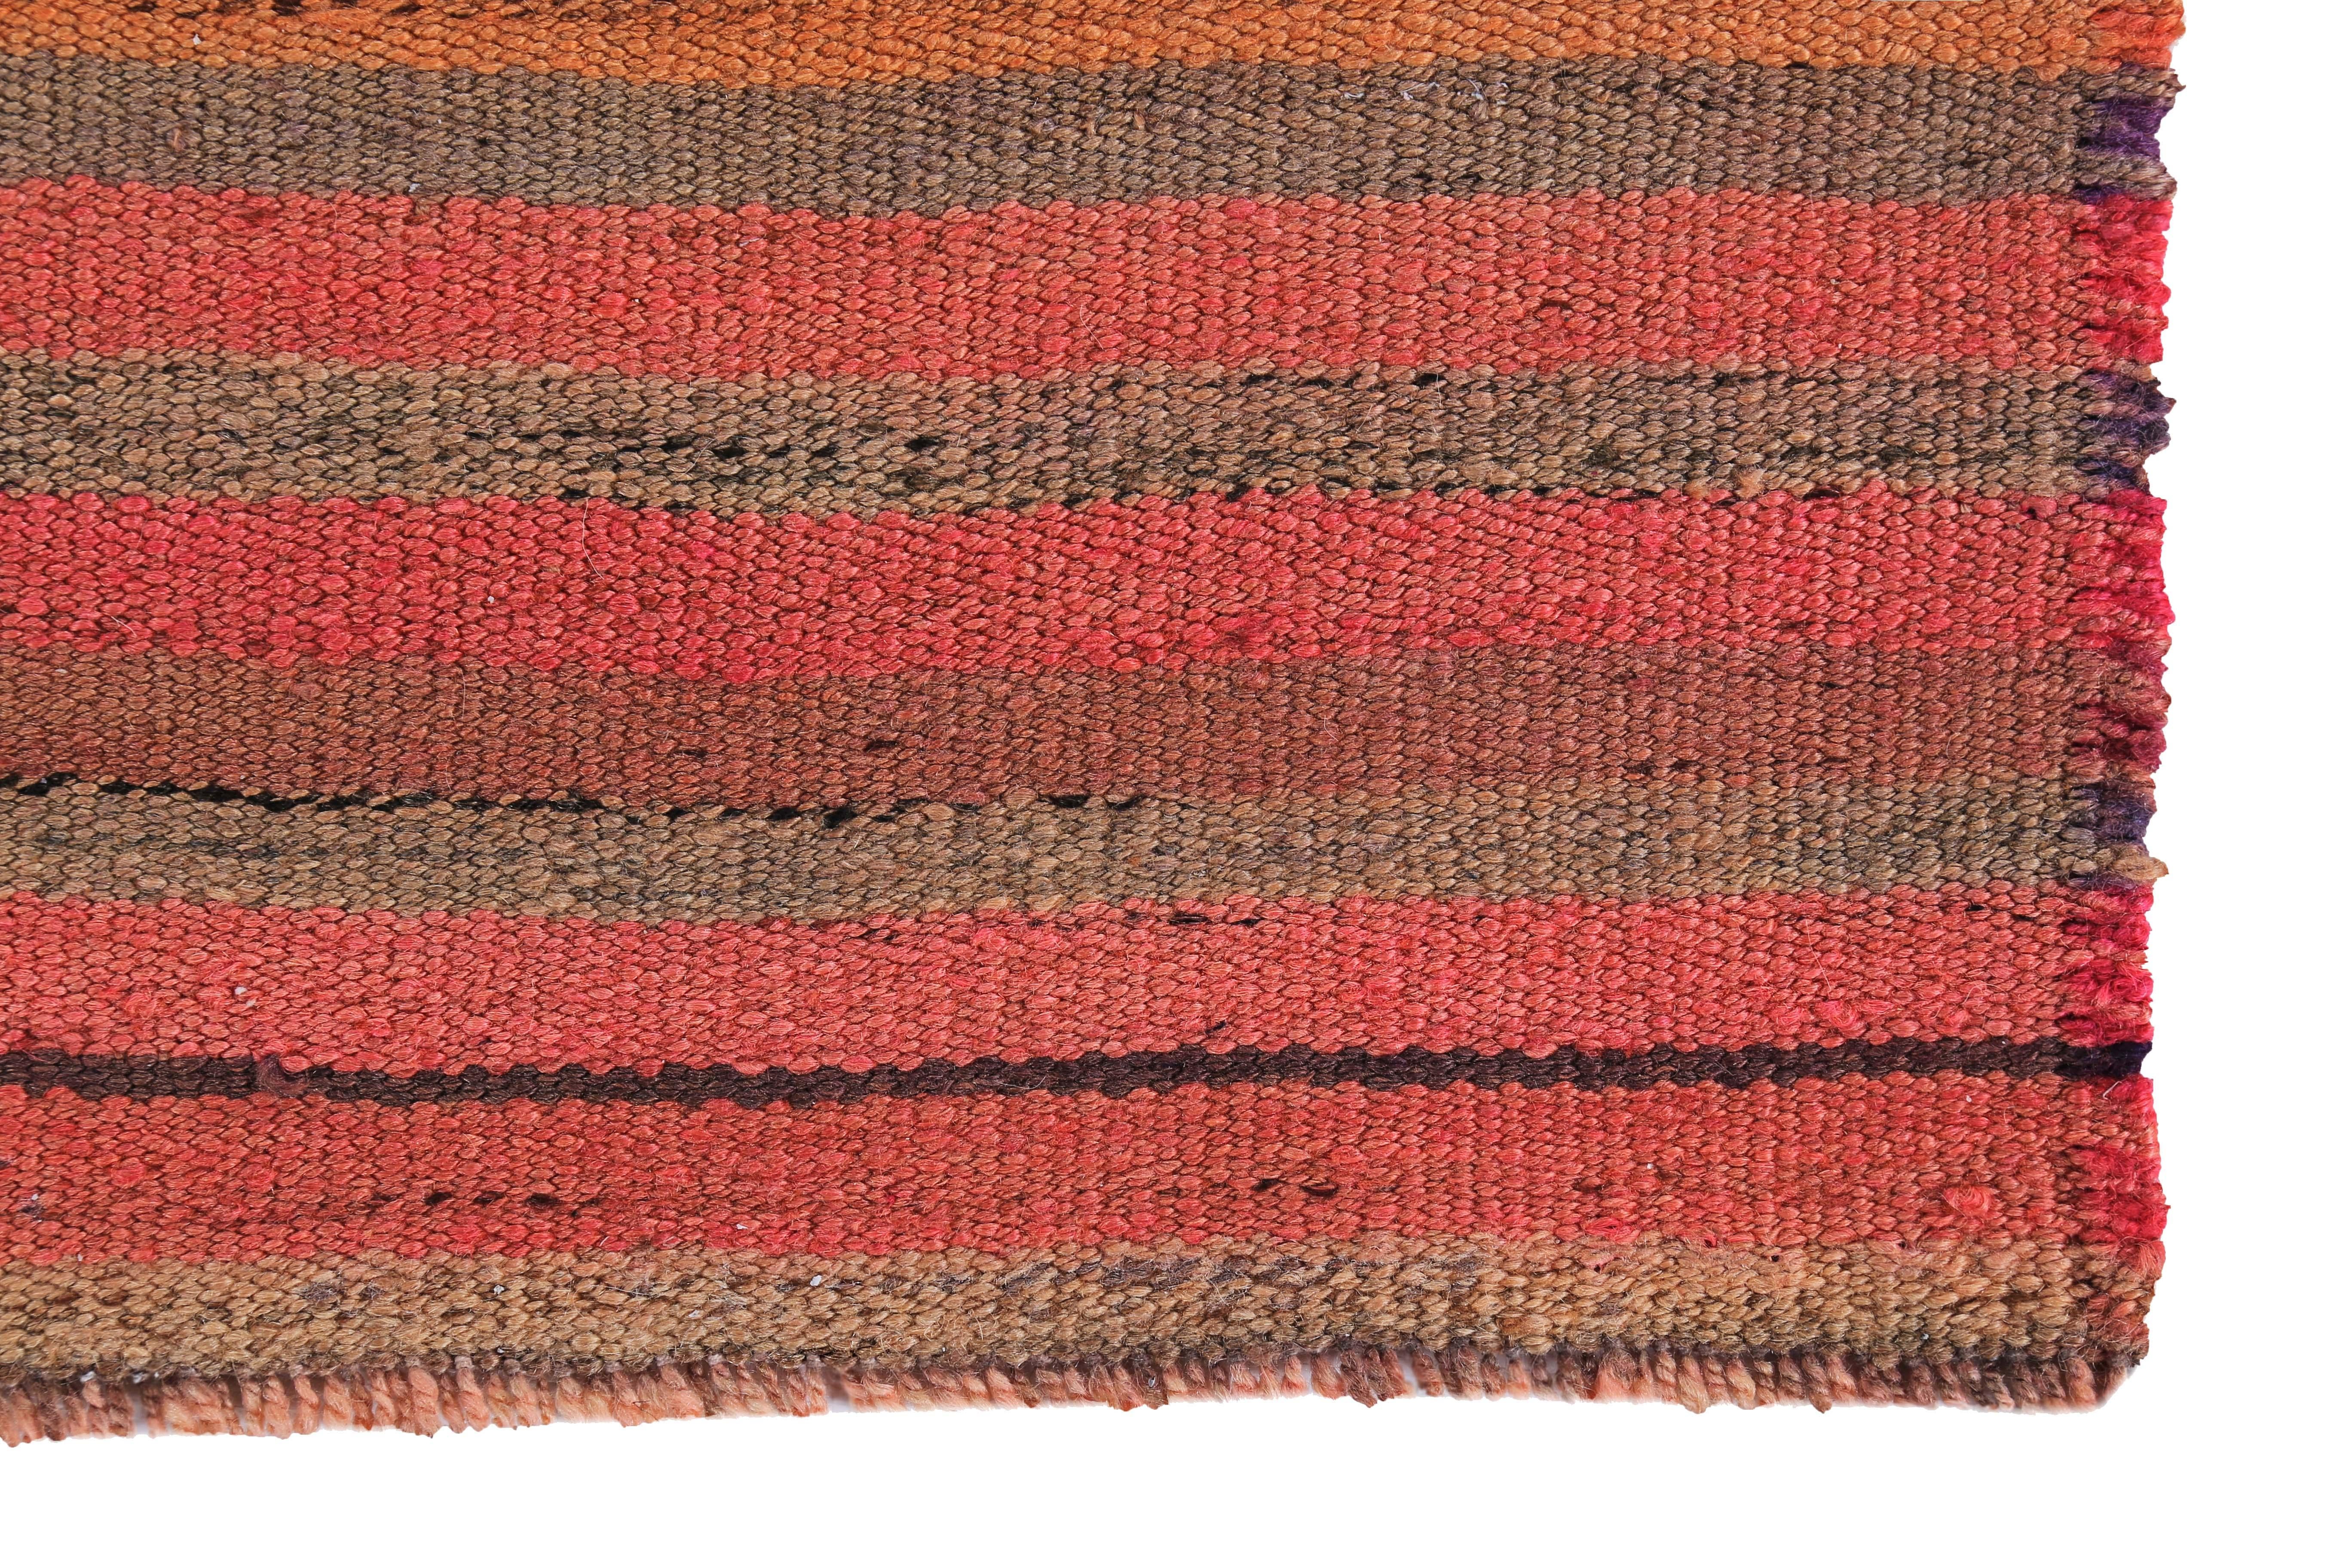 Turkish Kilim Runner Rug with Red, Orange and Pink Stripes Pattern In New Condition For Sale In Dallas, TX